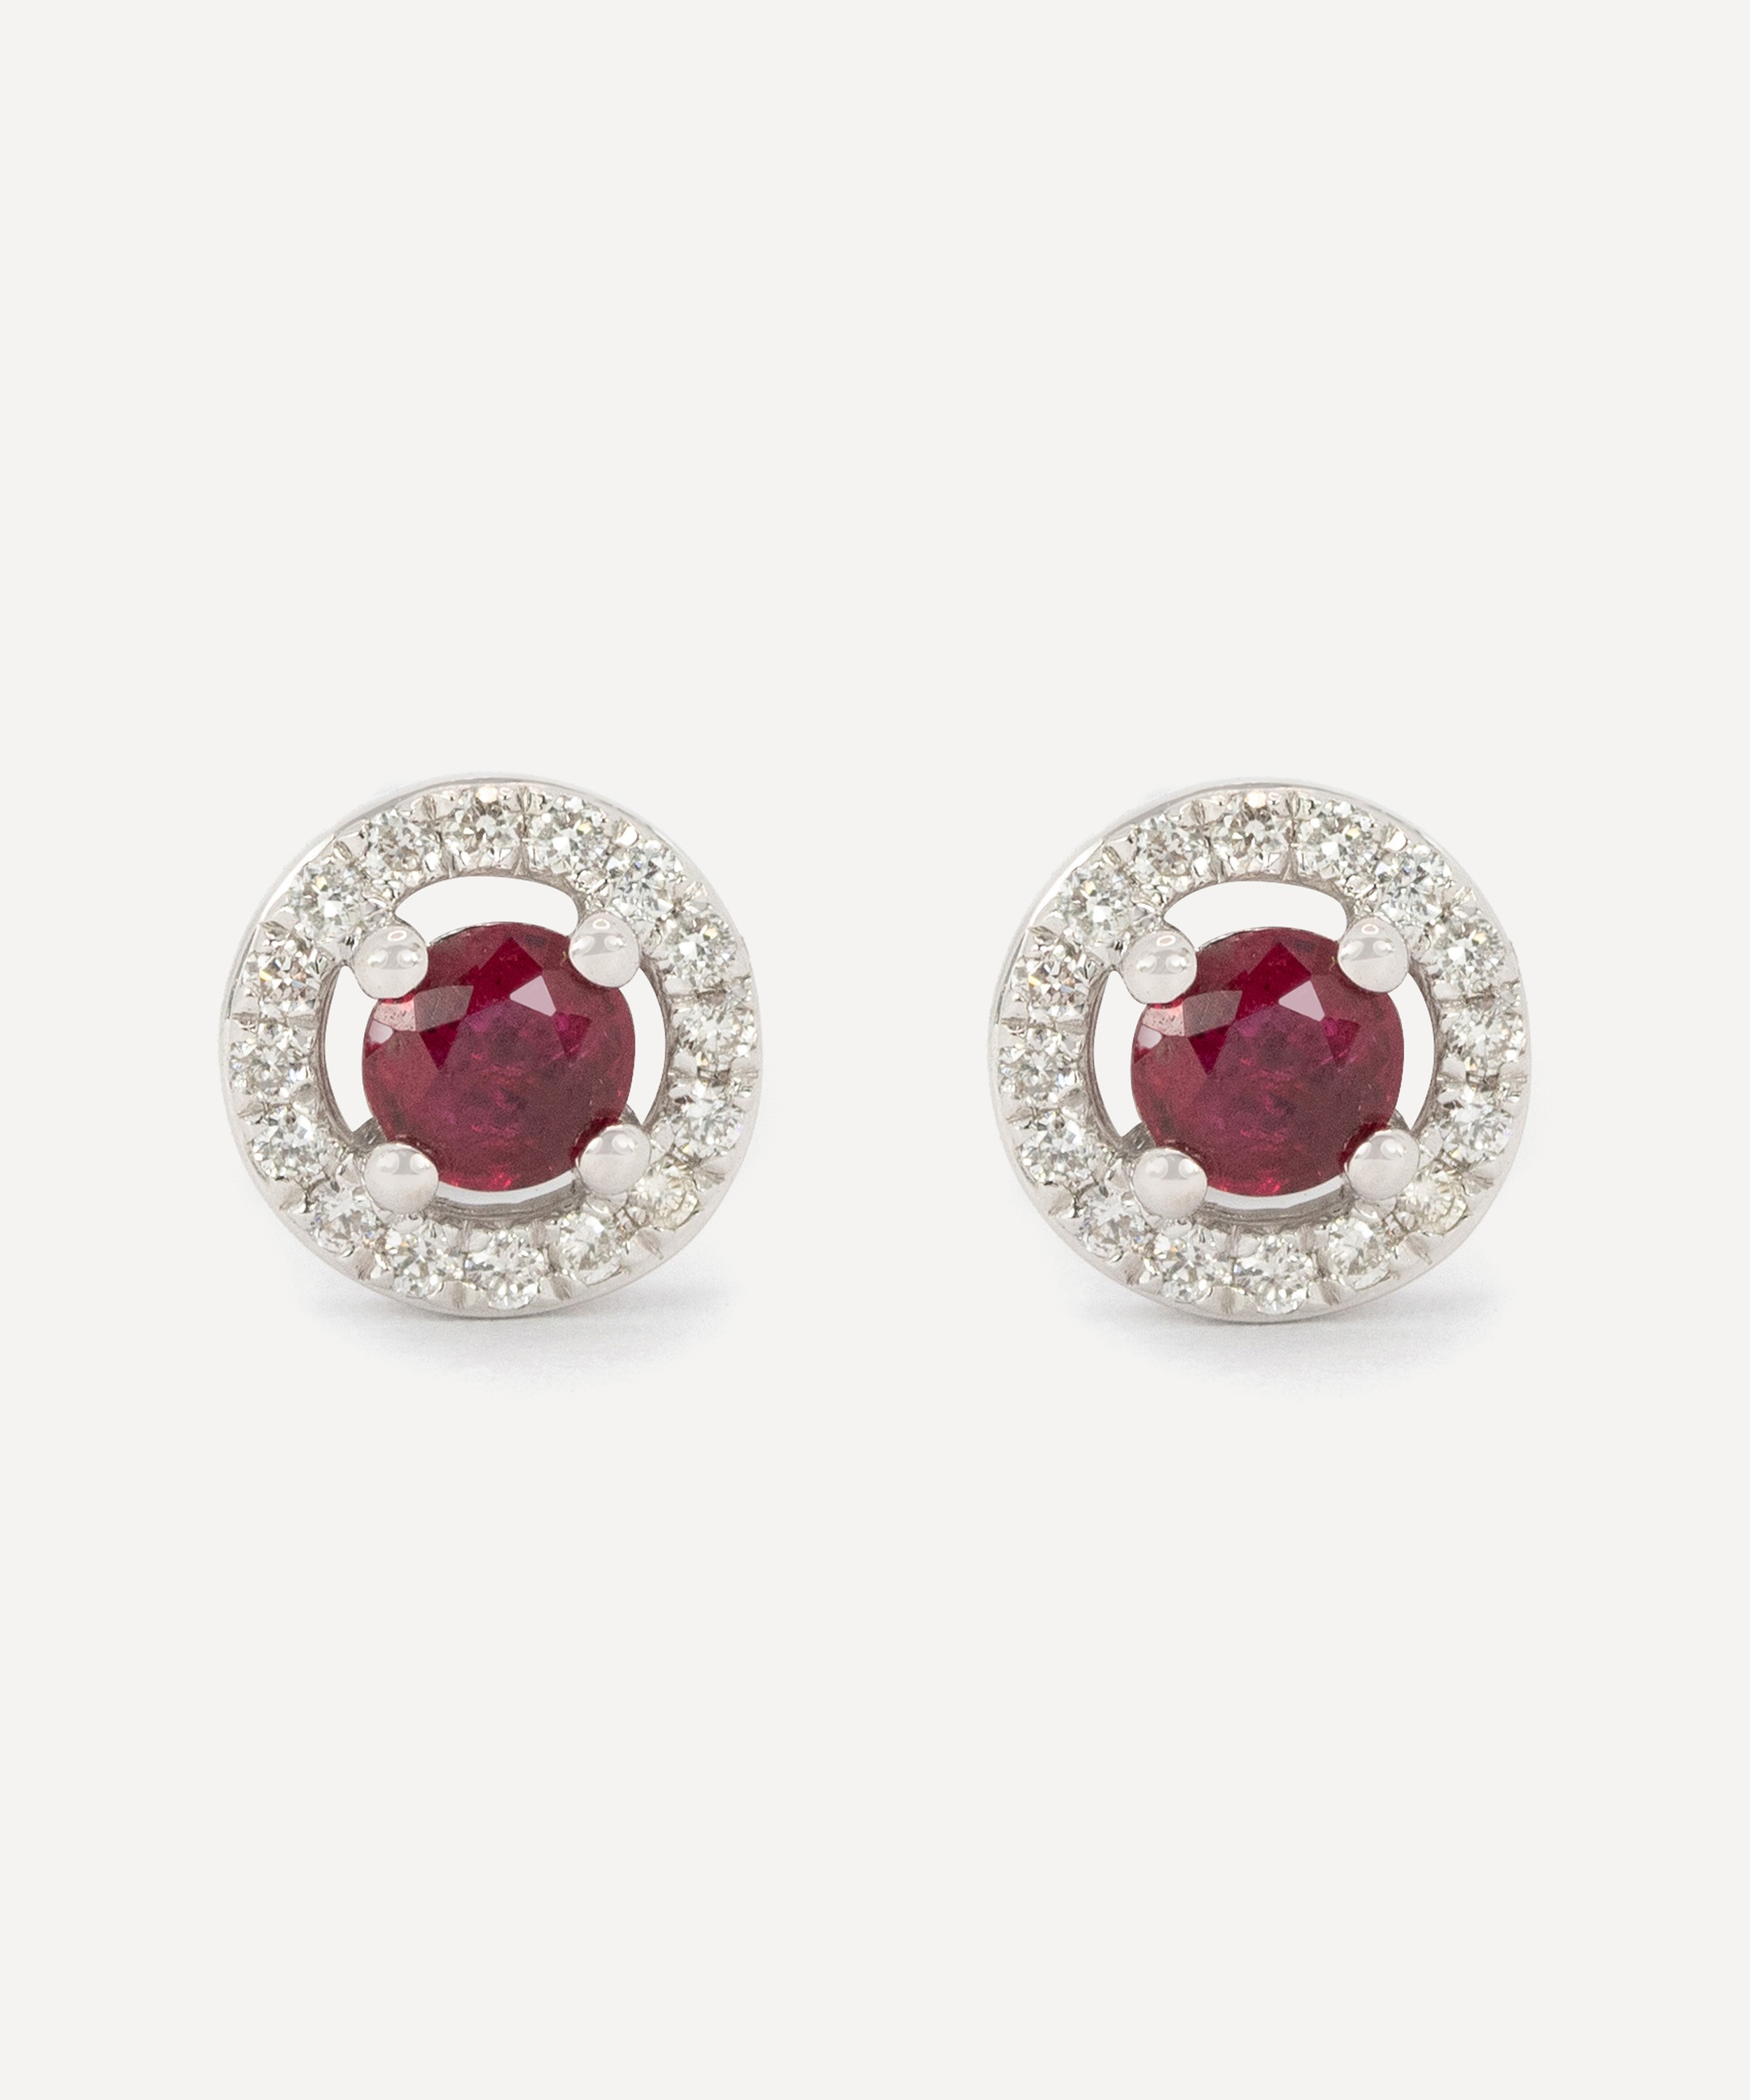 Kojis - 18ct White Gold Ruby and Diamond Cluster Stud Earrings